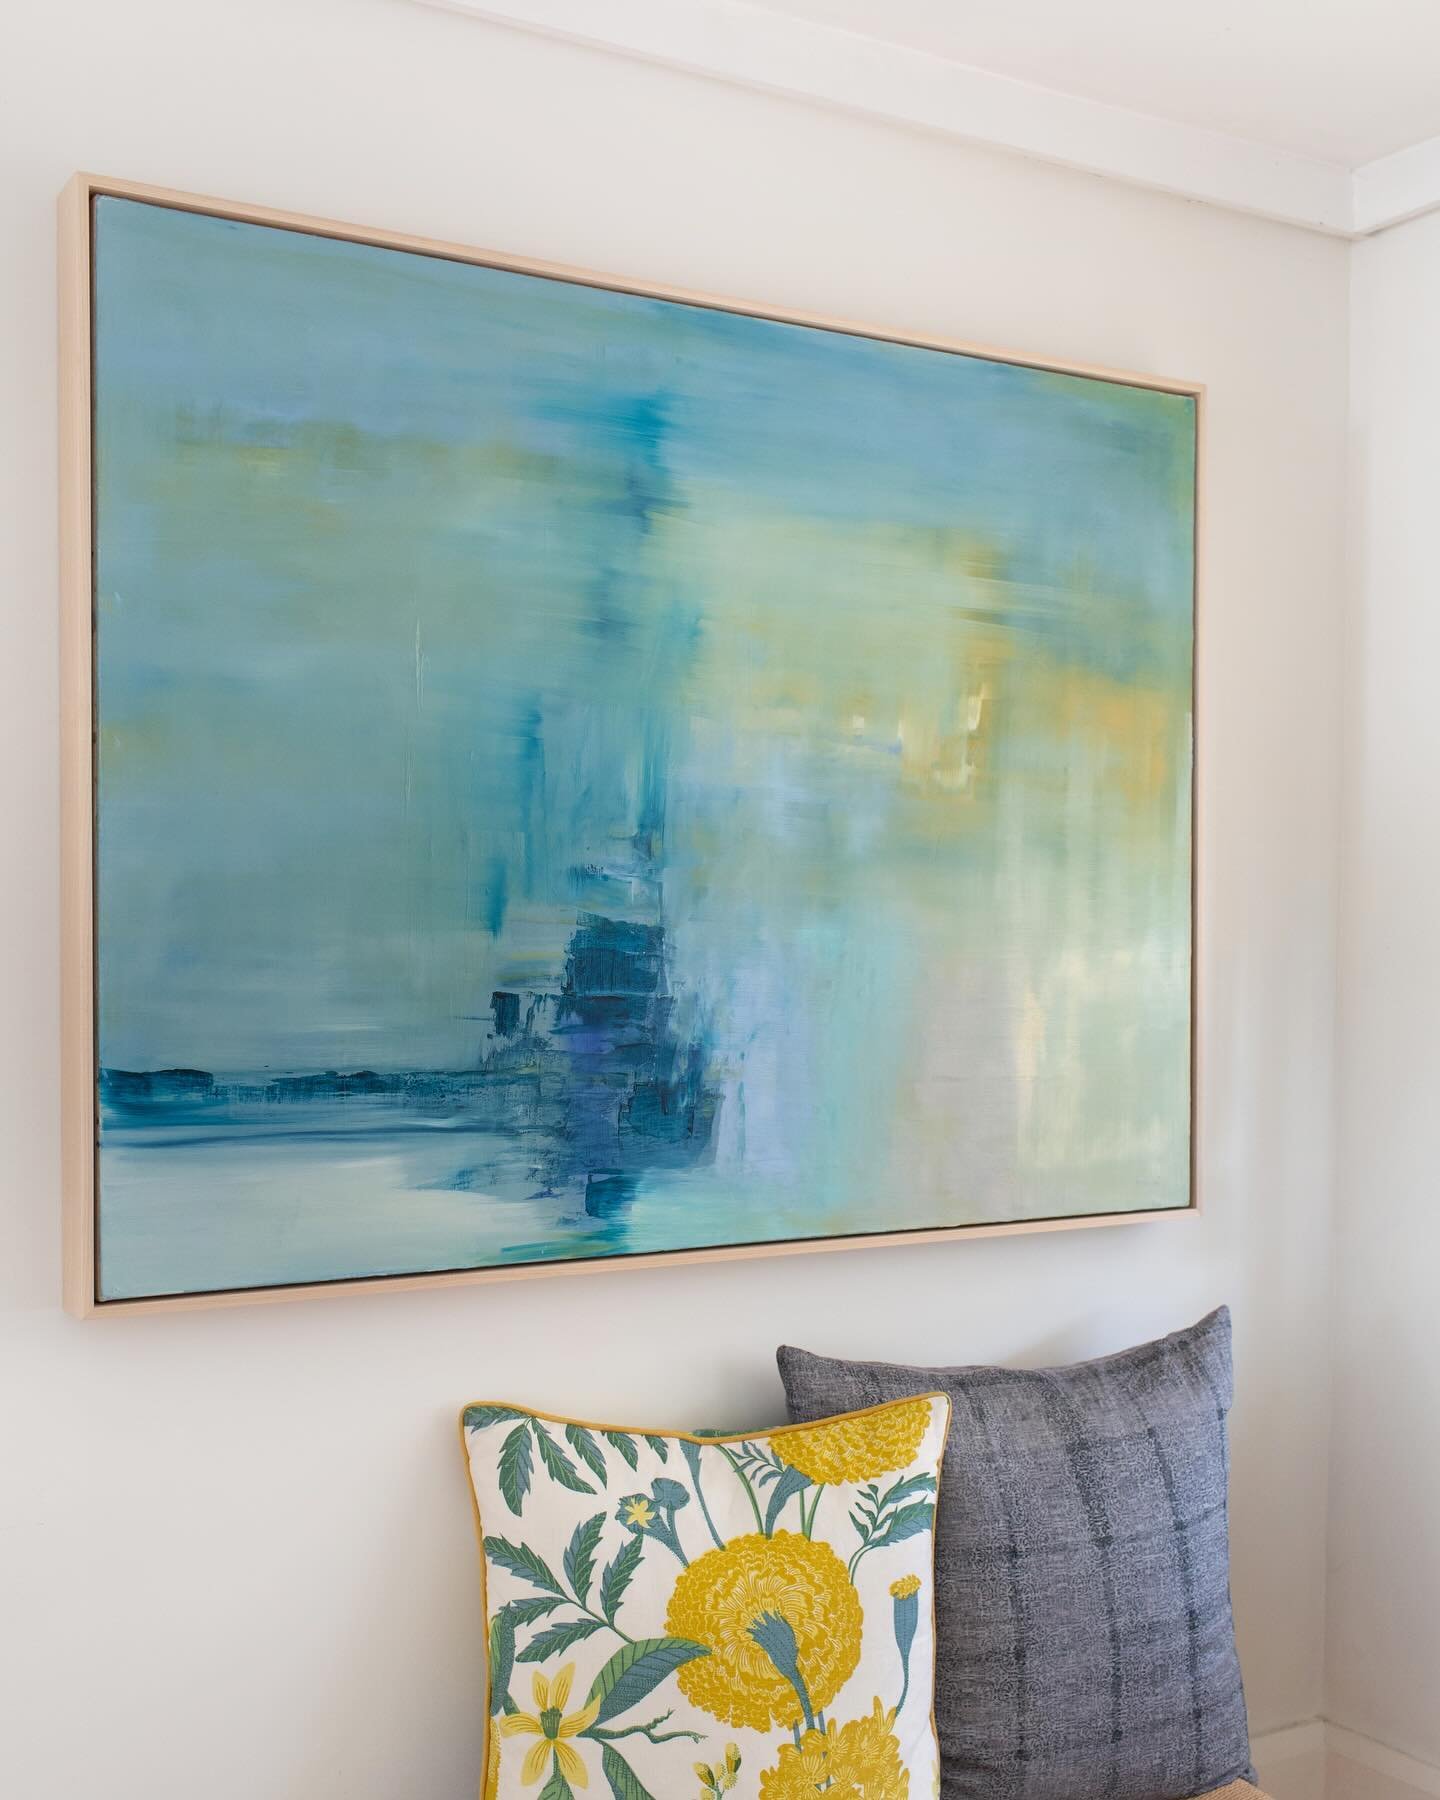 A glimpse of @dbcstudio&rsquo;s newly arrived &ldquo;Floating Dock&rdquo; - a framed 36in x 48in oil on custom built canvas. The colors and light in this painting are absolutely captivating up close. Message me to set up a time to view this or any of